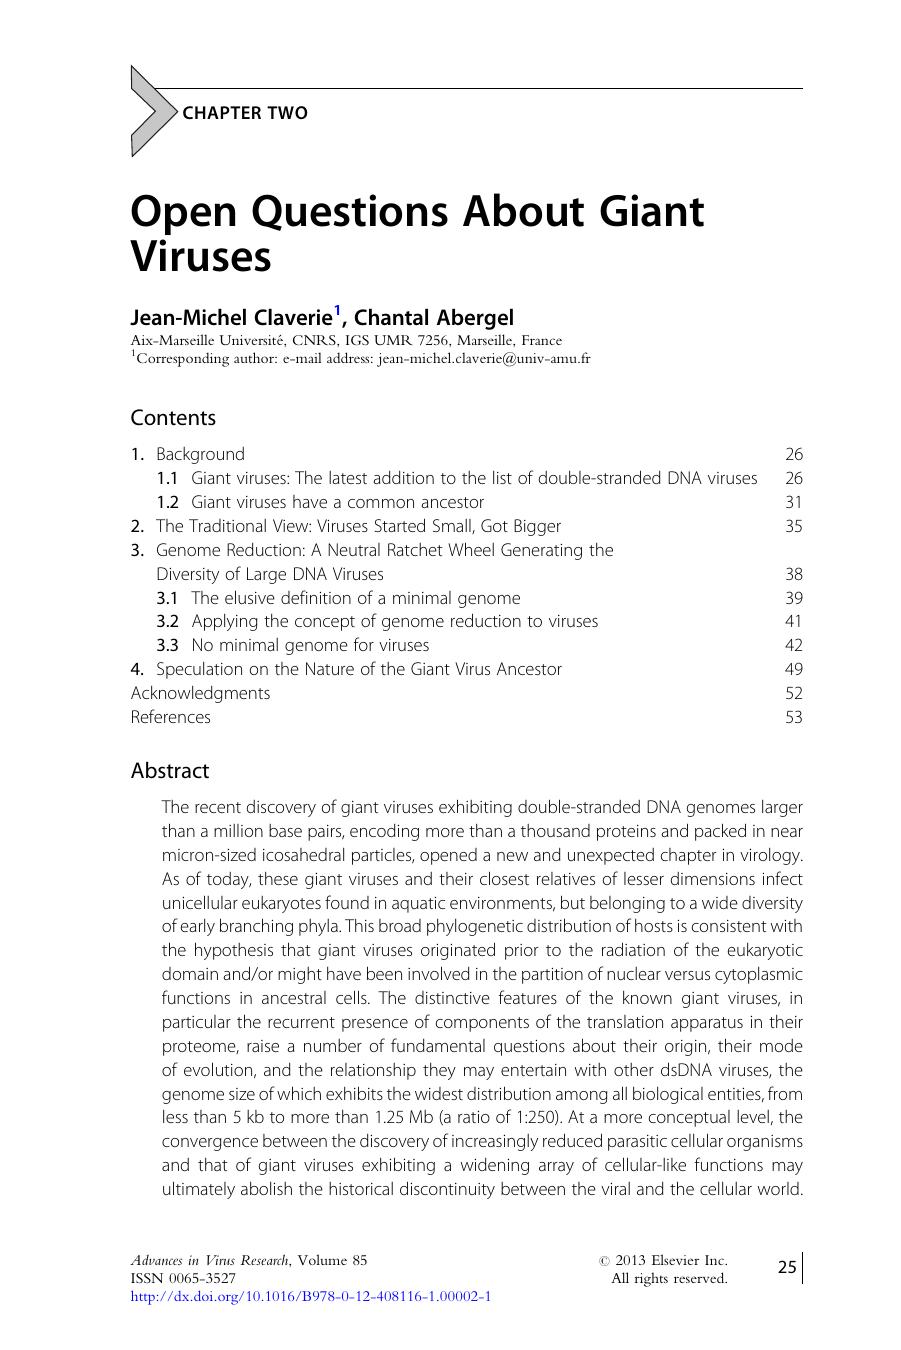 Open Questions About Giant Viruses by Jean-Michel Claverie & Chantal Abergel